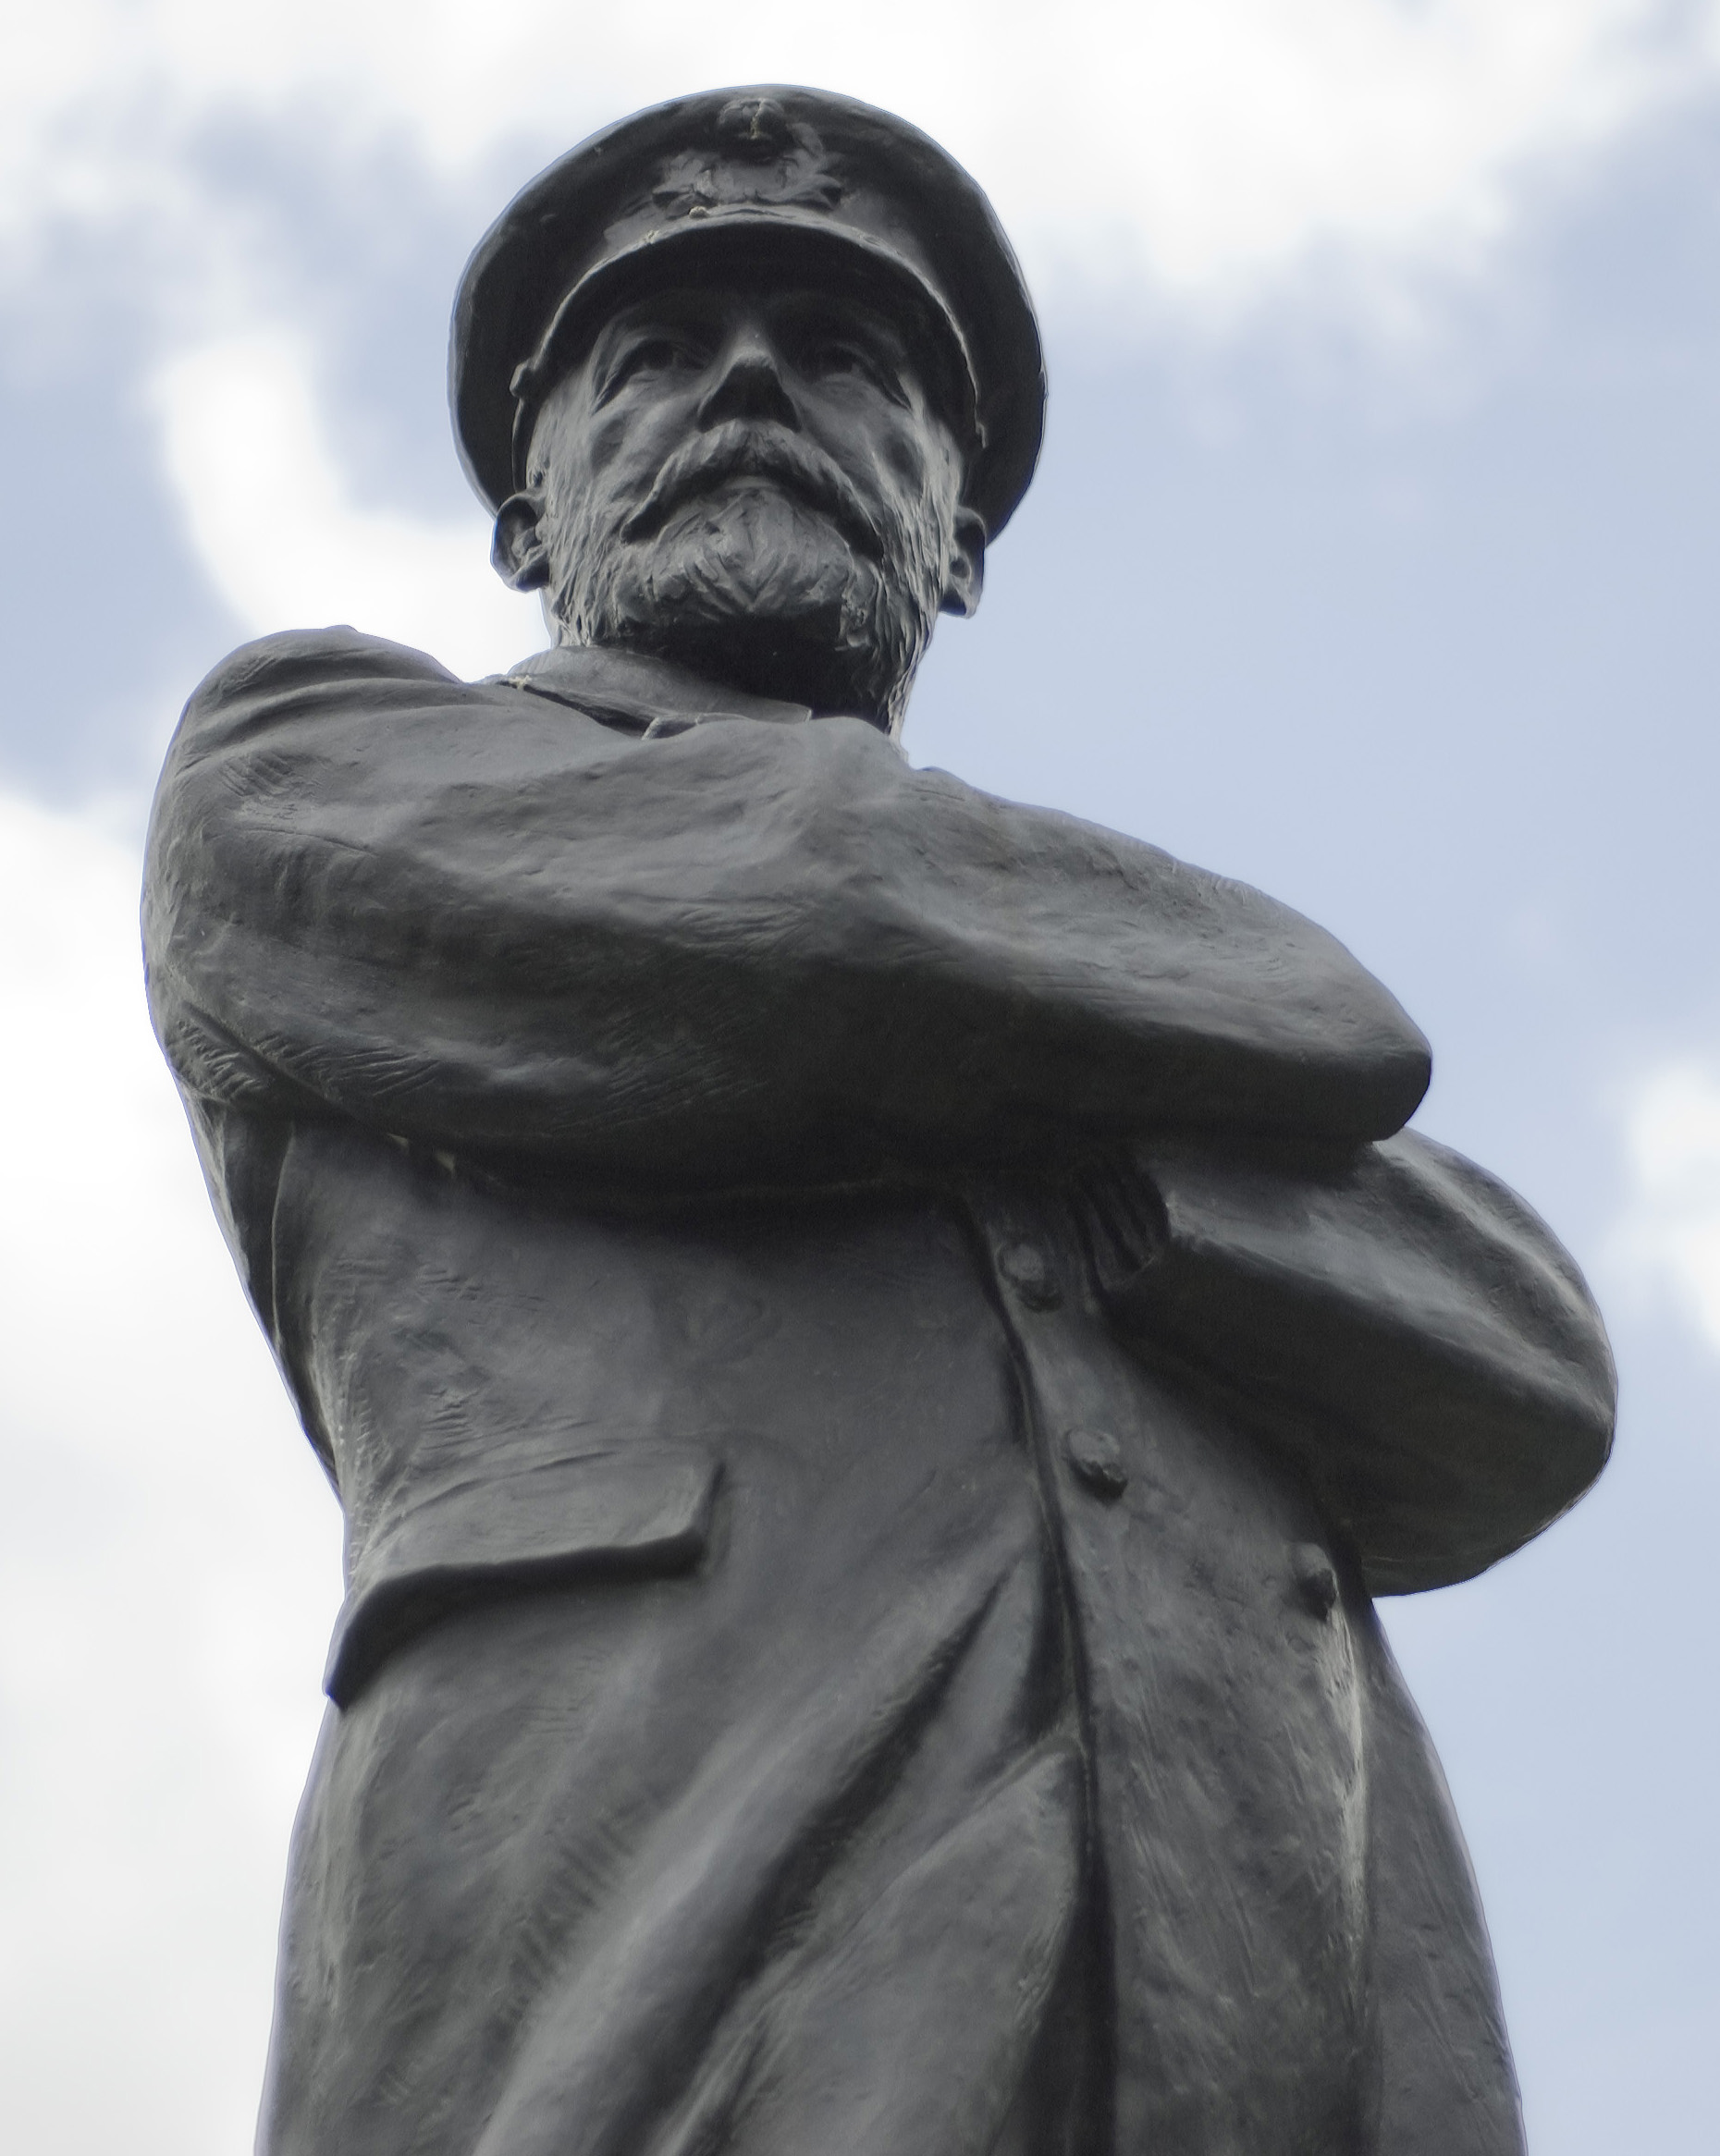 photo shows an image of a statue of captain smith